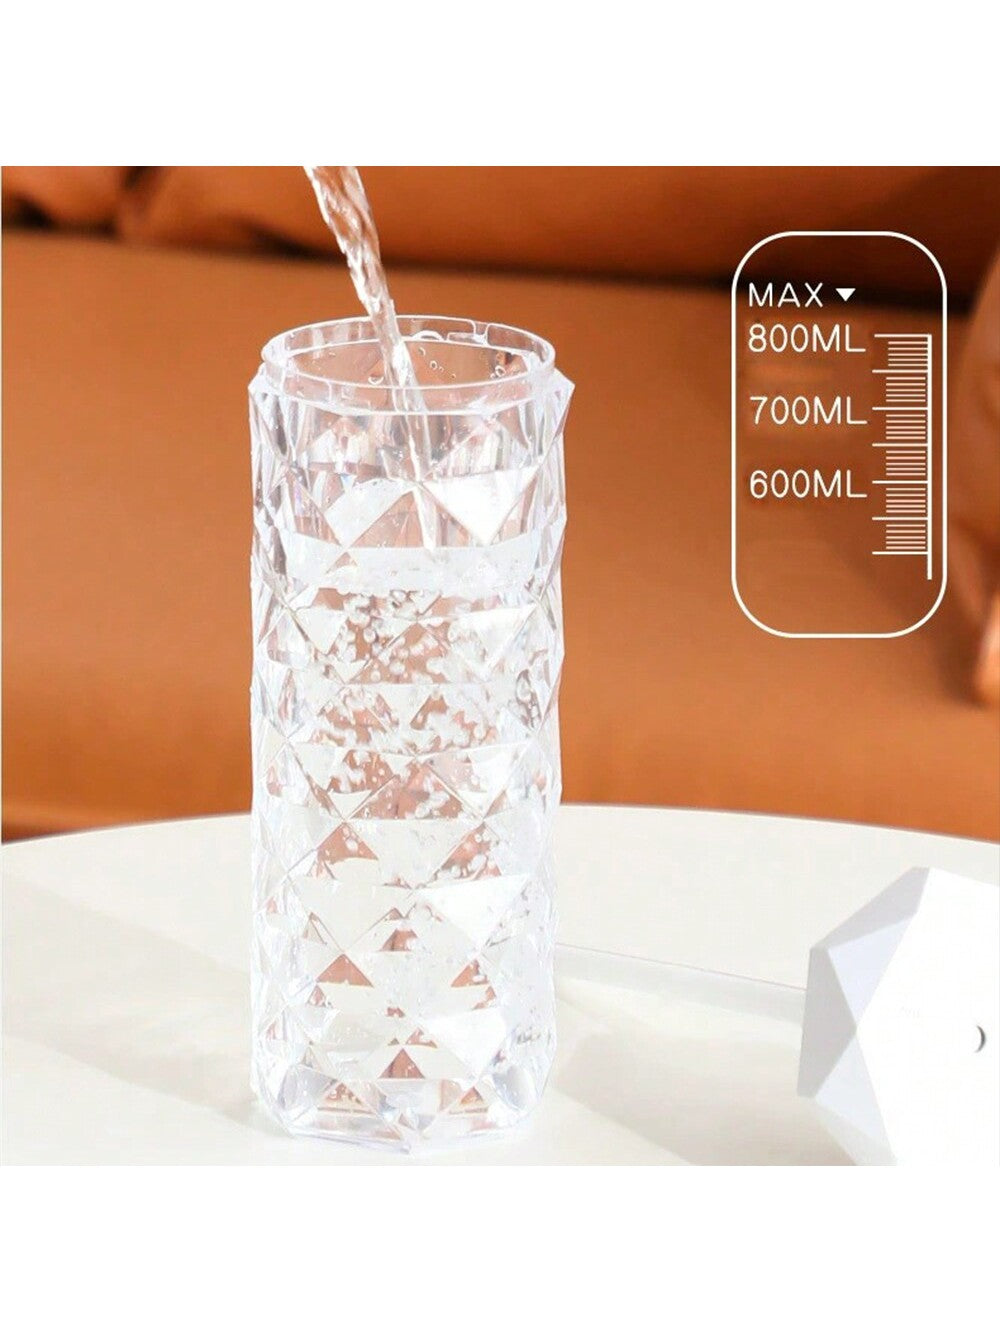 Crystal humidifier home small quiet colorful atmosphere bedroom desktop car USB humidifier high appearance level atmosphere light, bedroom bedside night light air humidifier home quiet bedroom fog amount student dormitory-White-10